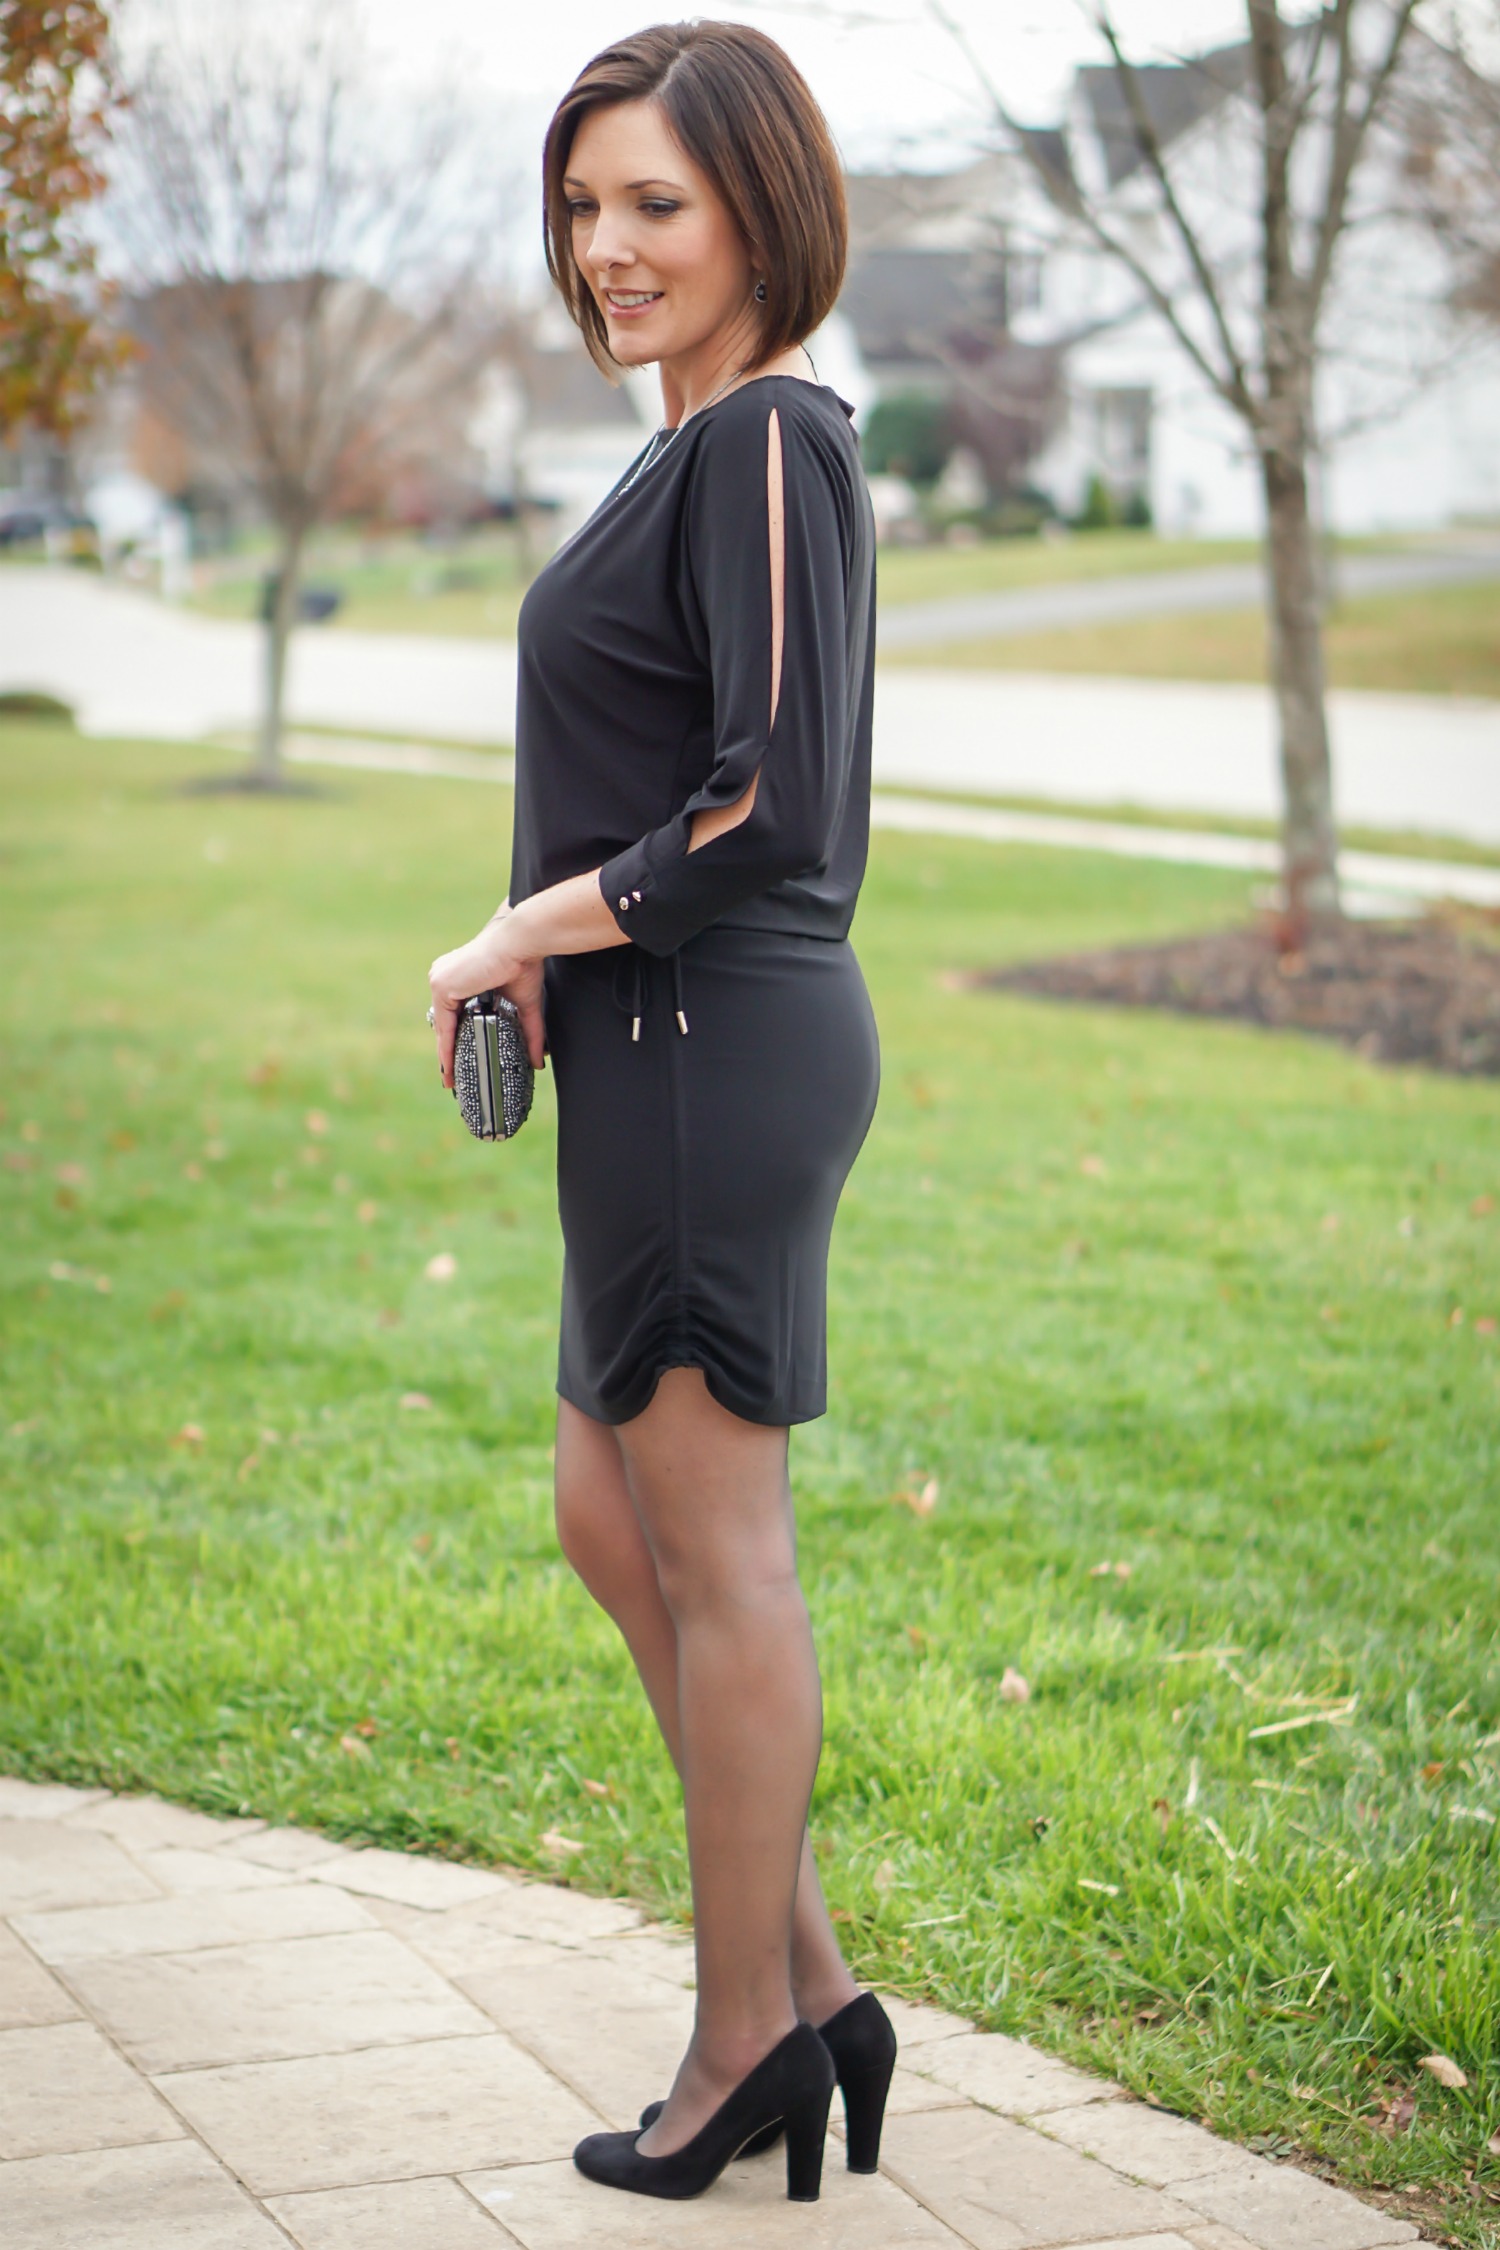 What to Wear to an Office Christmas Party: LBD with fun accessories, sheer black hose, and black suede pumps